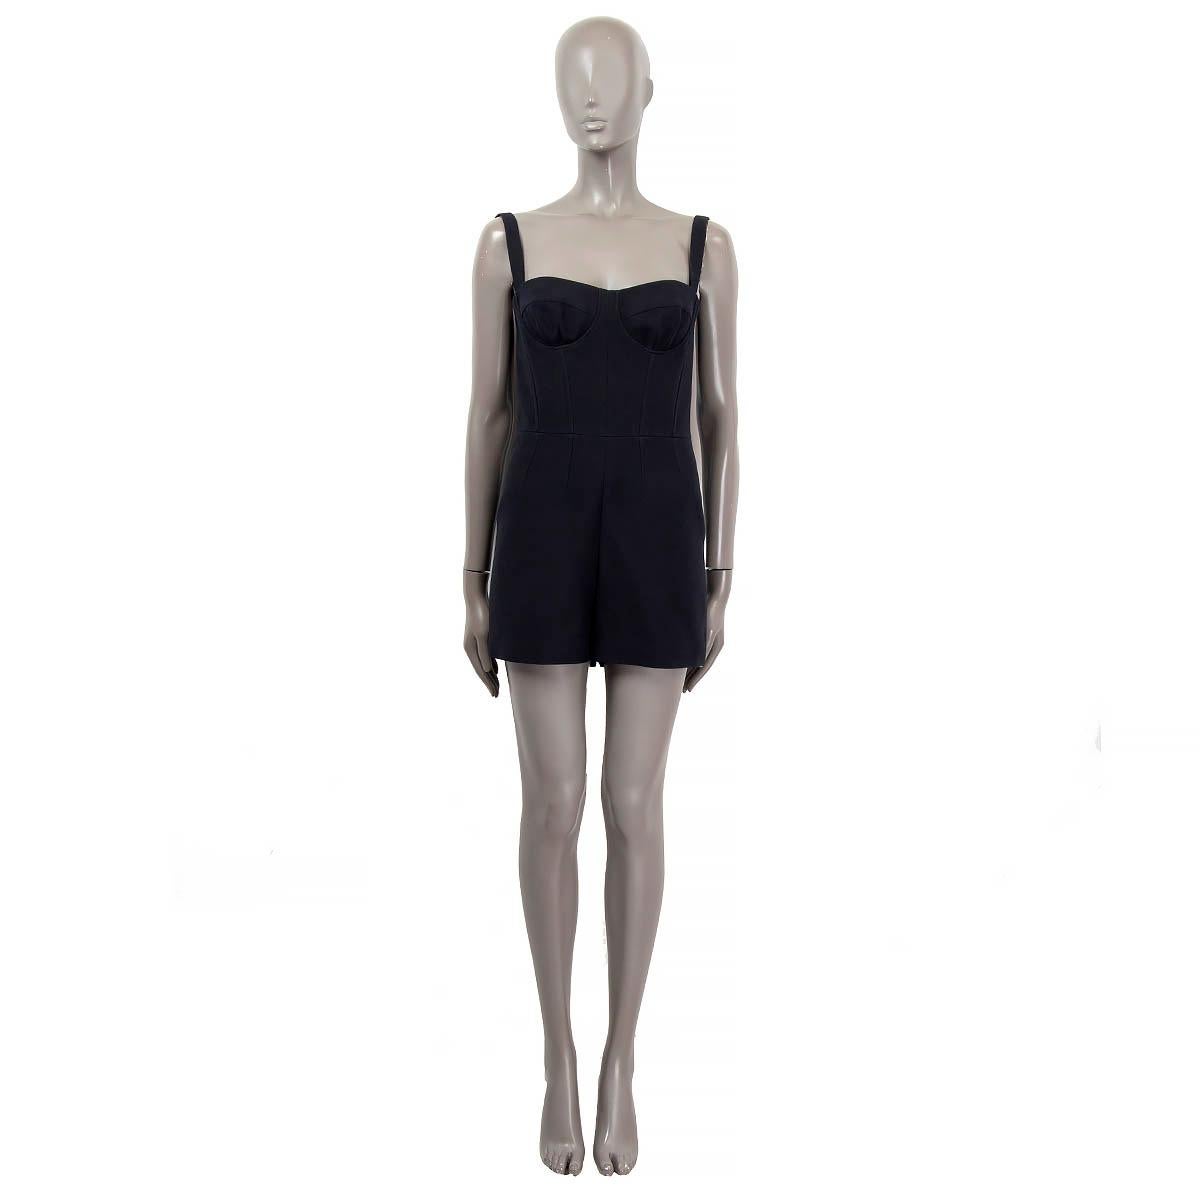 100% authentic Christian Dior mini bustier romper in black wool (77%) and silk (23%). Opens with a zipper on the back. Lined in black silk (100%). Has been worn and is in excellent.

2018 Spring/Summer

Measurements
Model	Dior18E
Tag